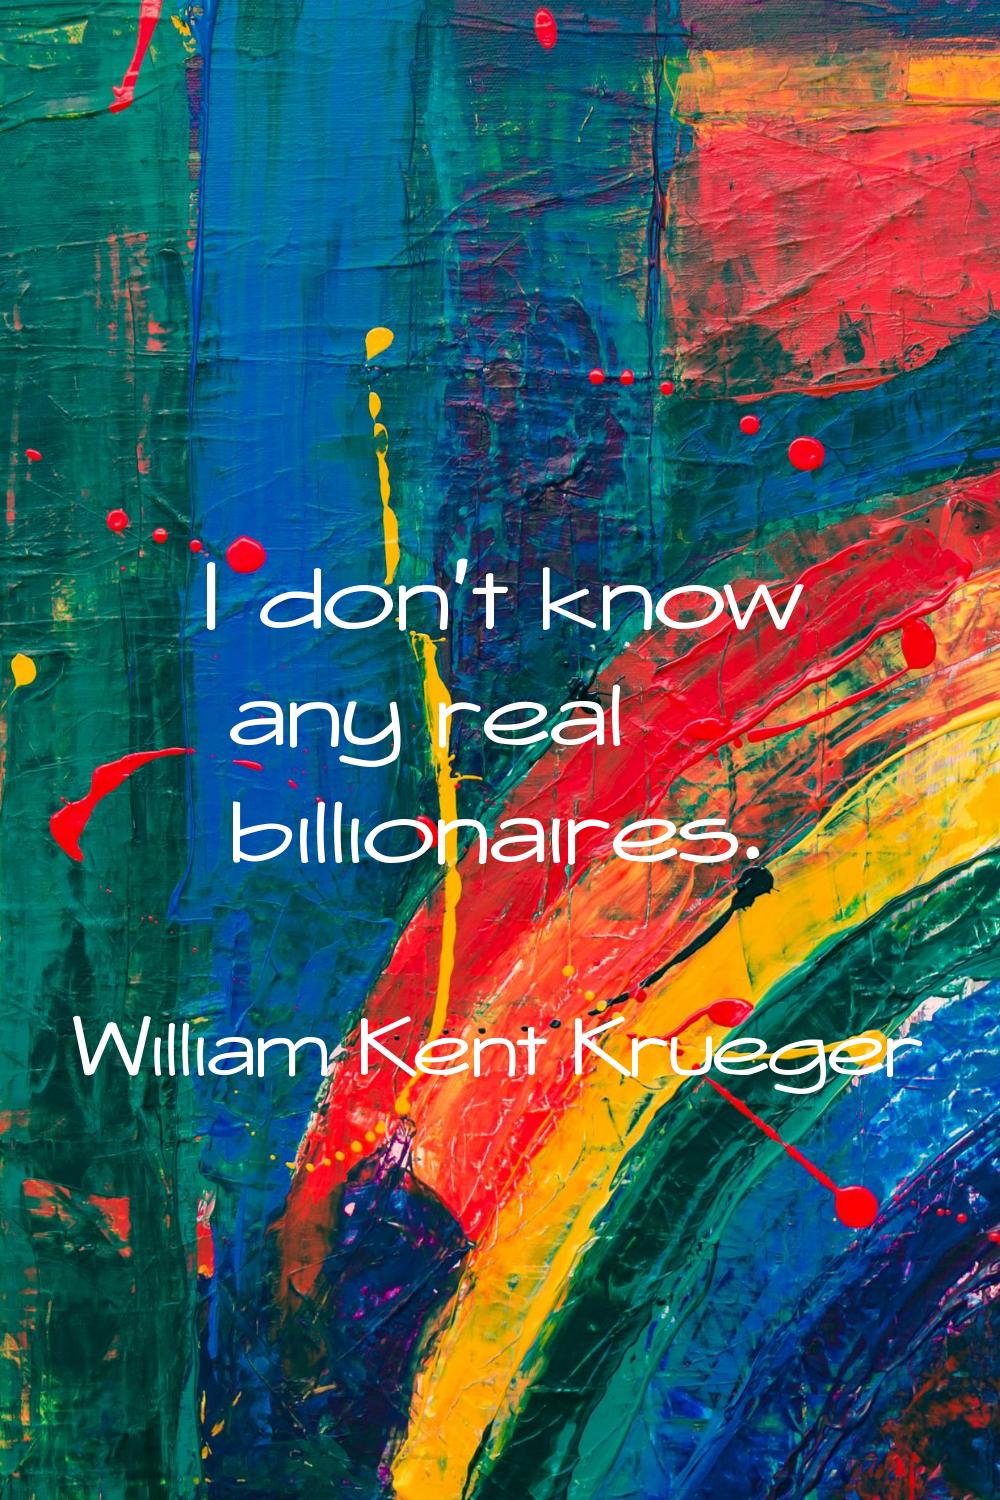 I don't know any real billionaires.